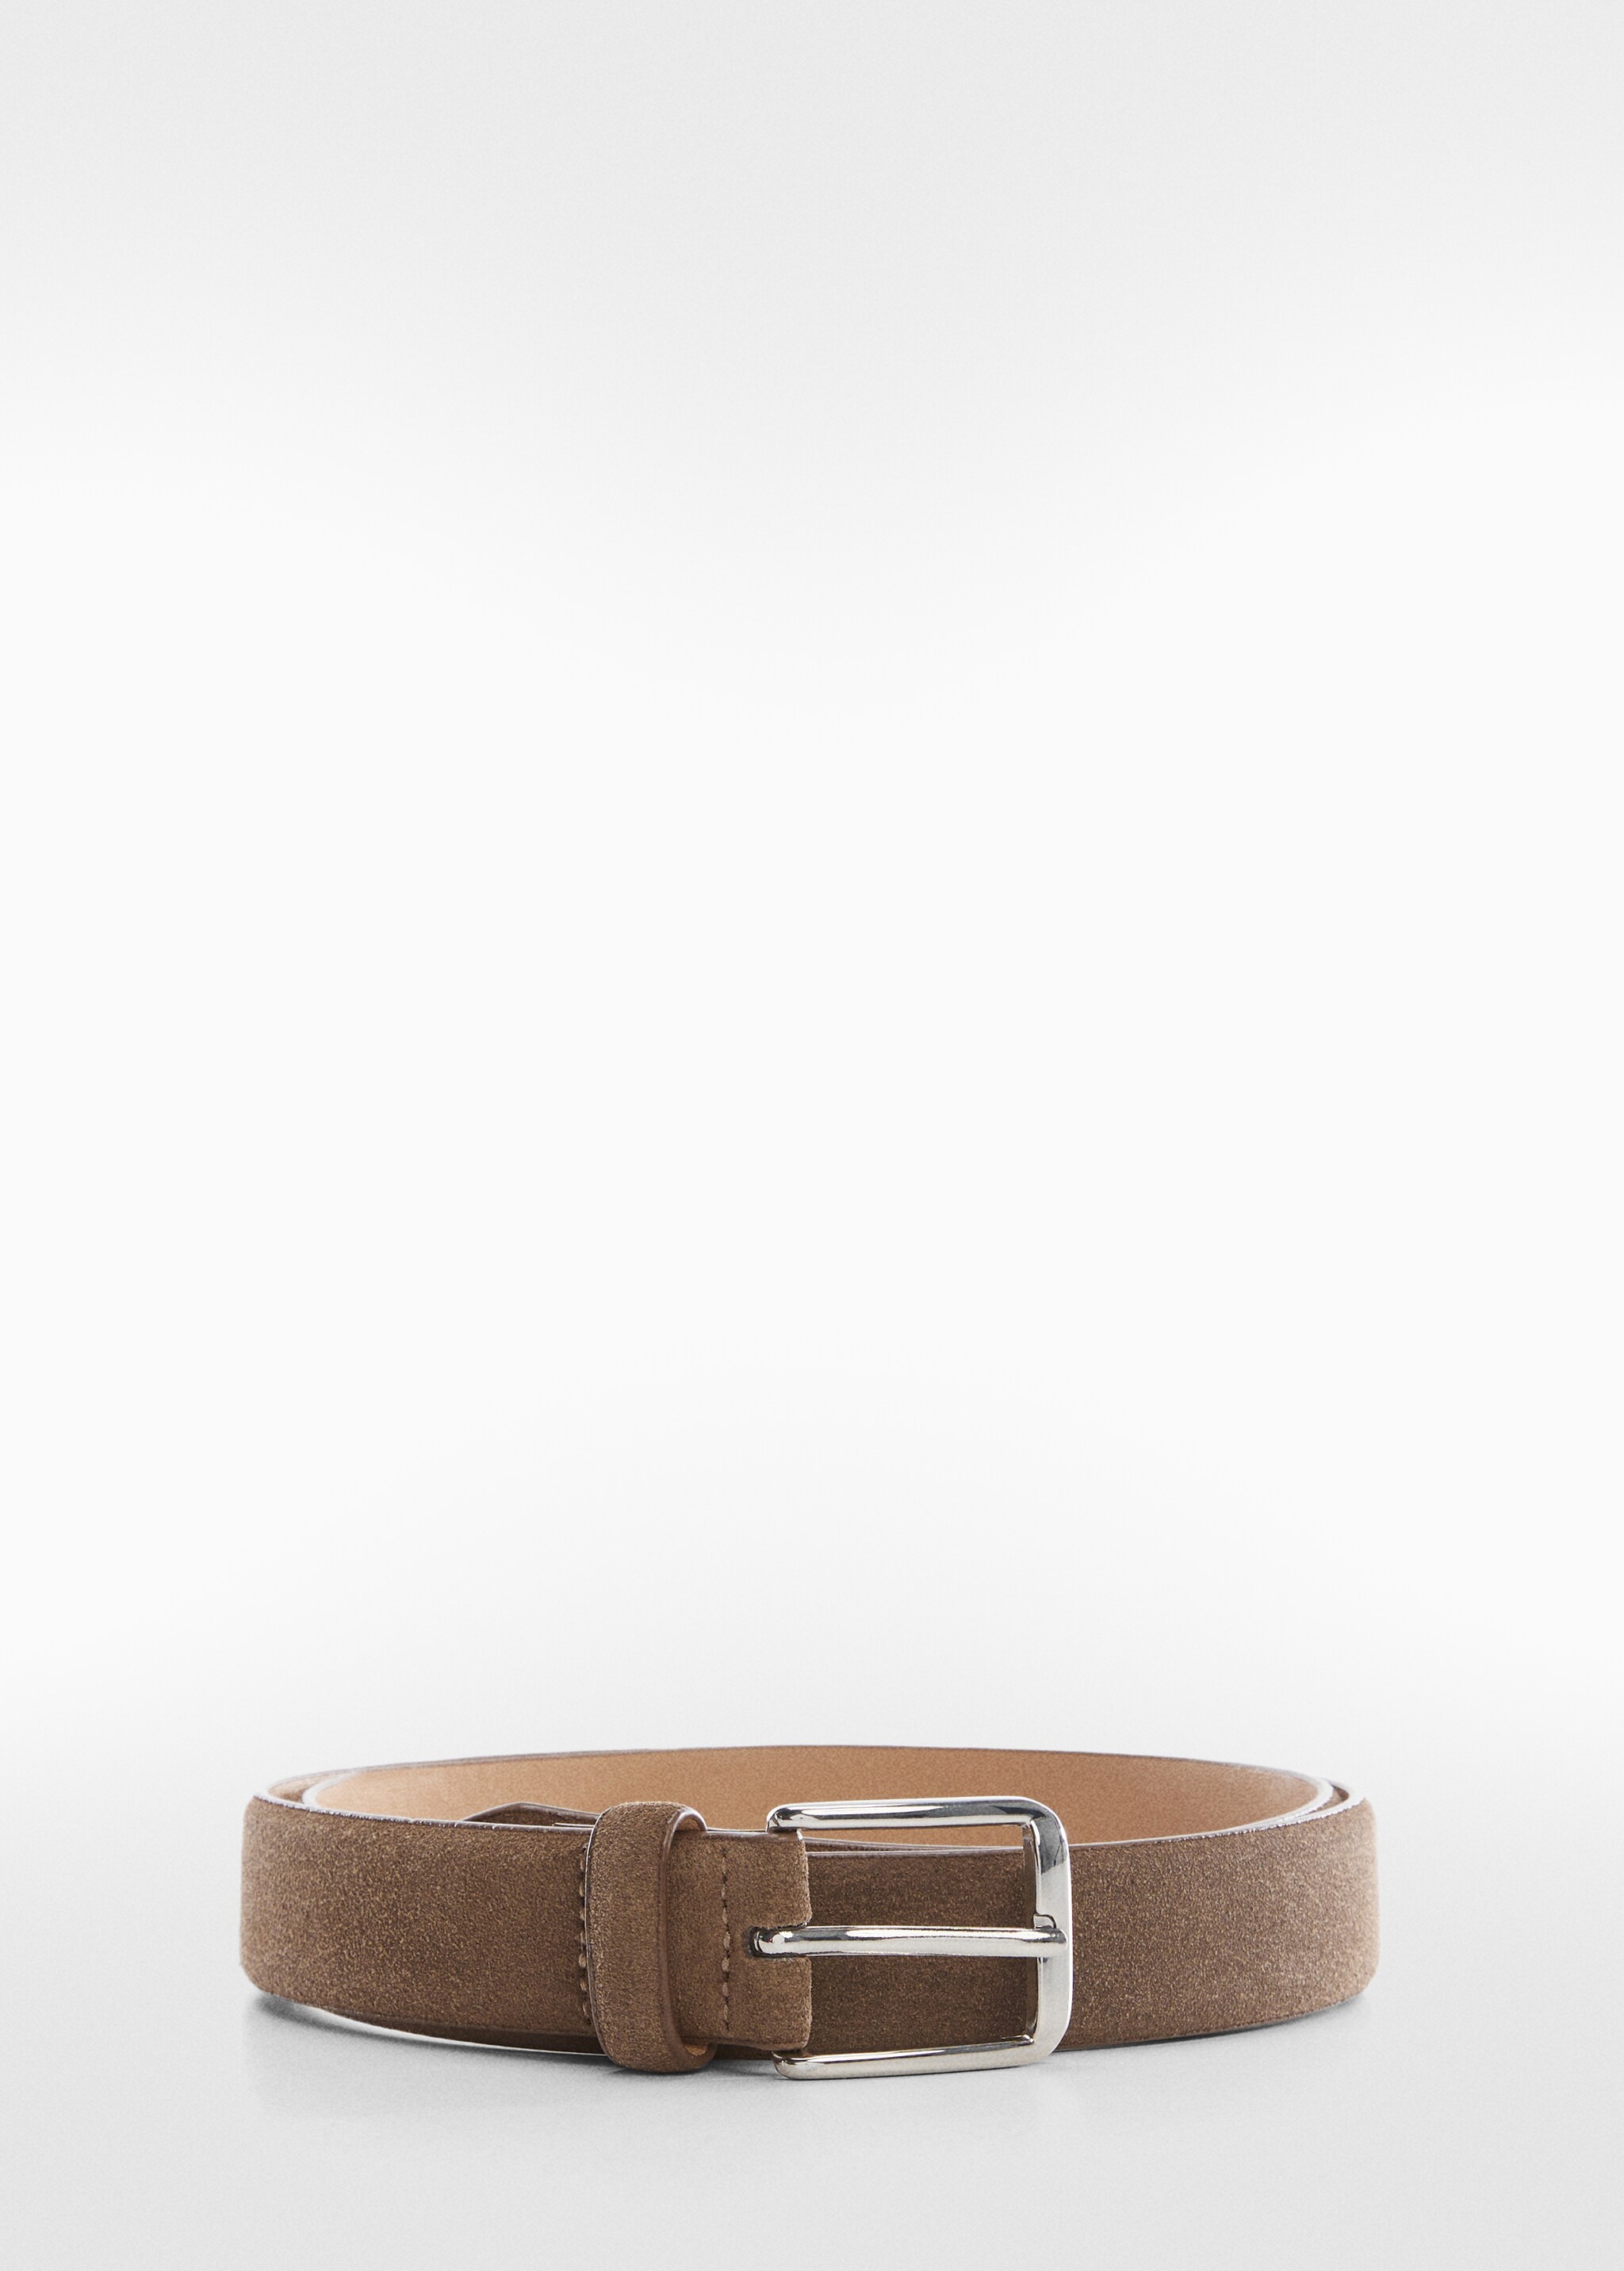 Suede belt - Article without model